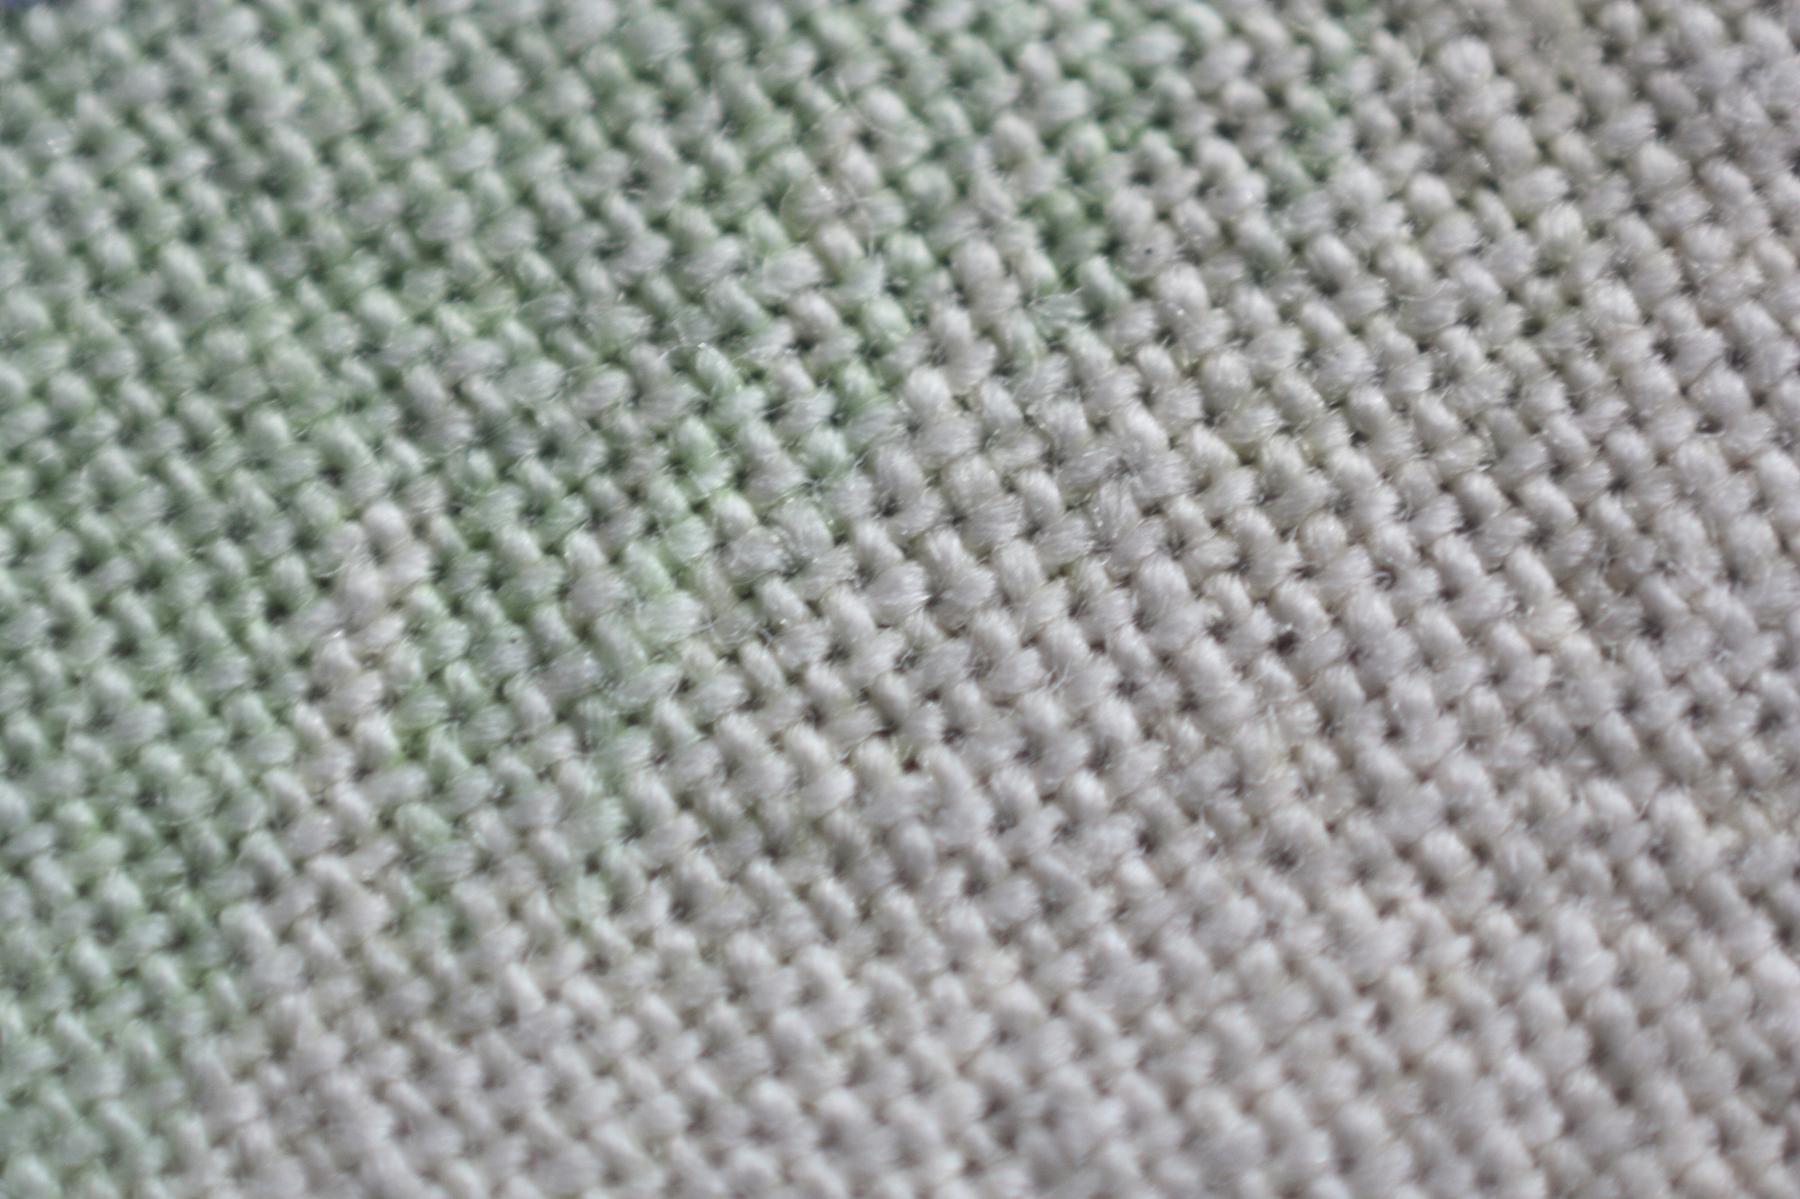 File:Simple-textile-magnified.jpg - a close up of a white and green colored knit fabric